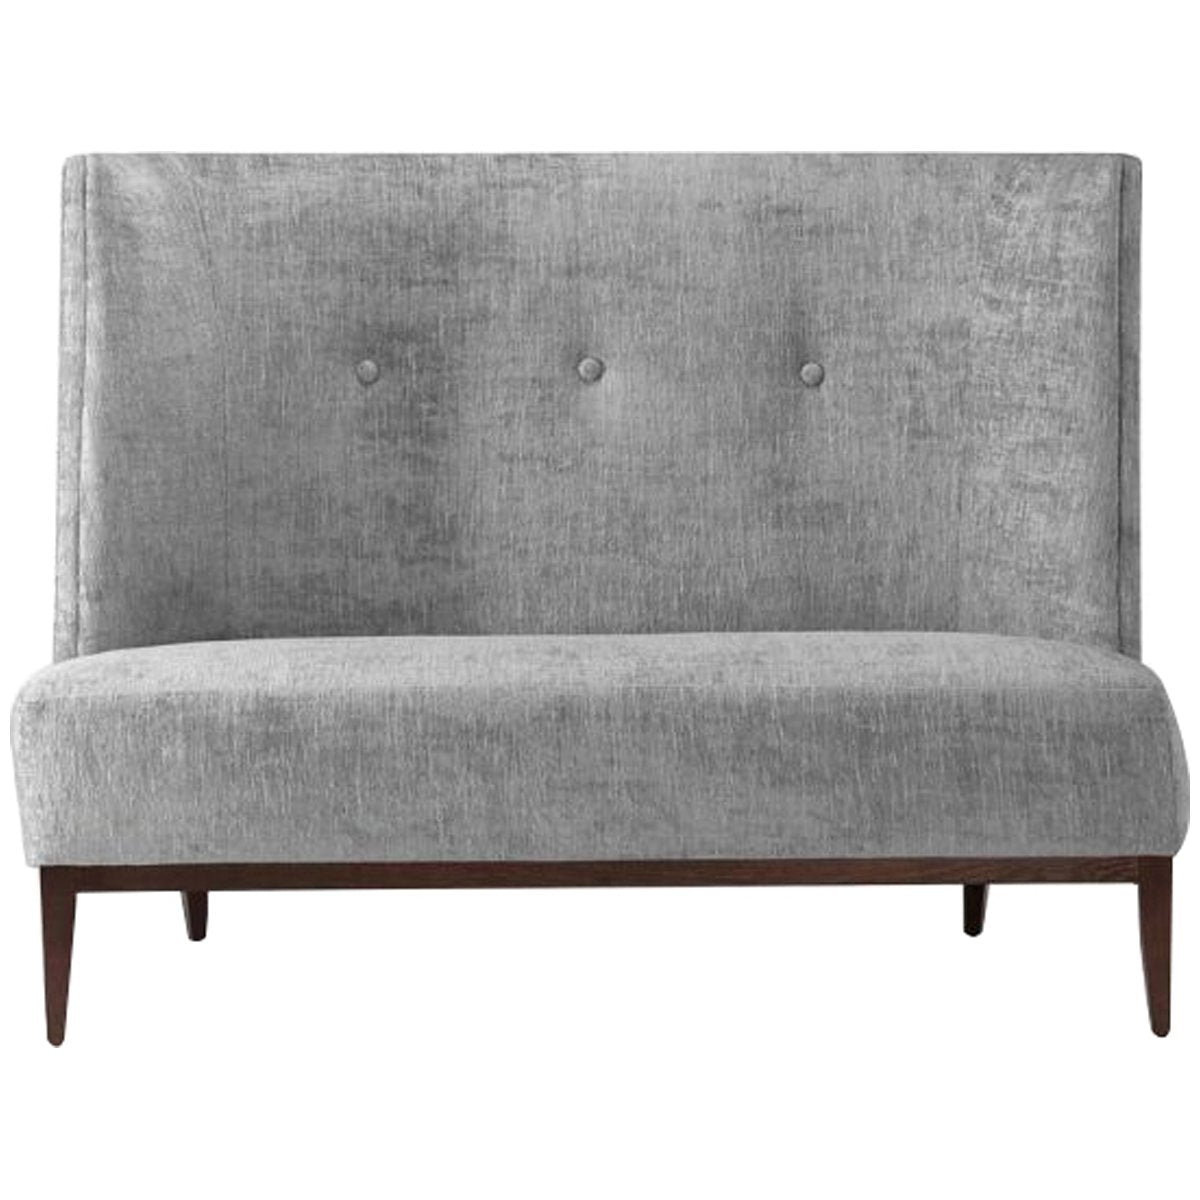 Interlude Home Chloe Banquette - Heathered Chenille